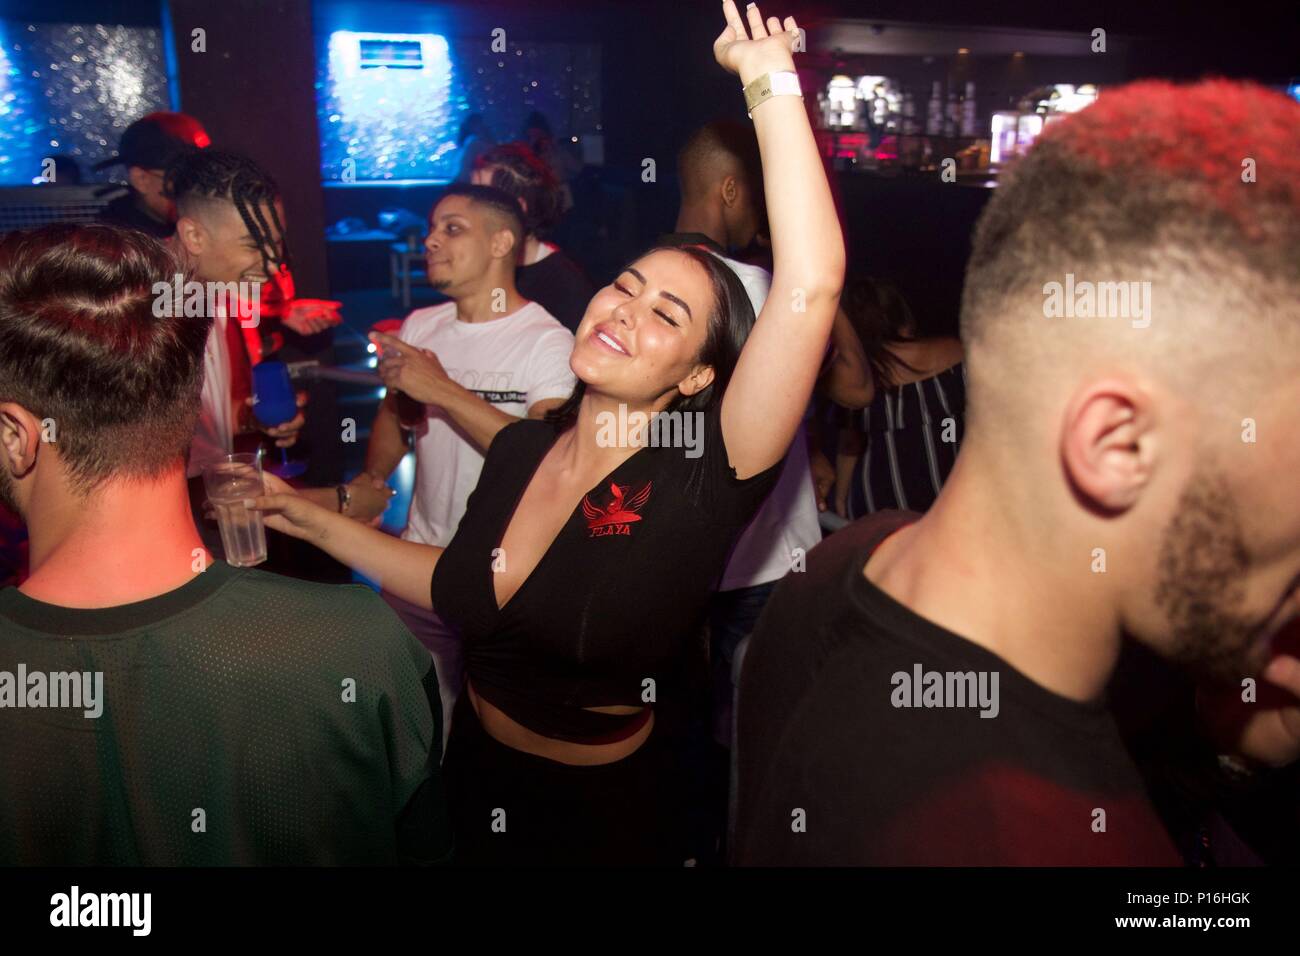 Watford, UK. 10th Jun, 2018. Marnie Simpson and Casey Johnson of Ex On The beach, Geordie Shore and Union J fame drunkenly party with friends at Hydeout 2.0 Watford fresh back from their recent holiday. The couple downed vodka and disaronno as they let their hair down stopping to chat and do shots with fans and stayed until 3am. Credit: Ayeesha Walsh/Alamy Live News Stock Photo